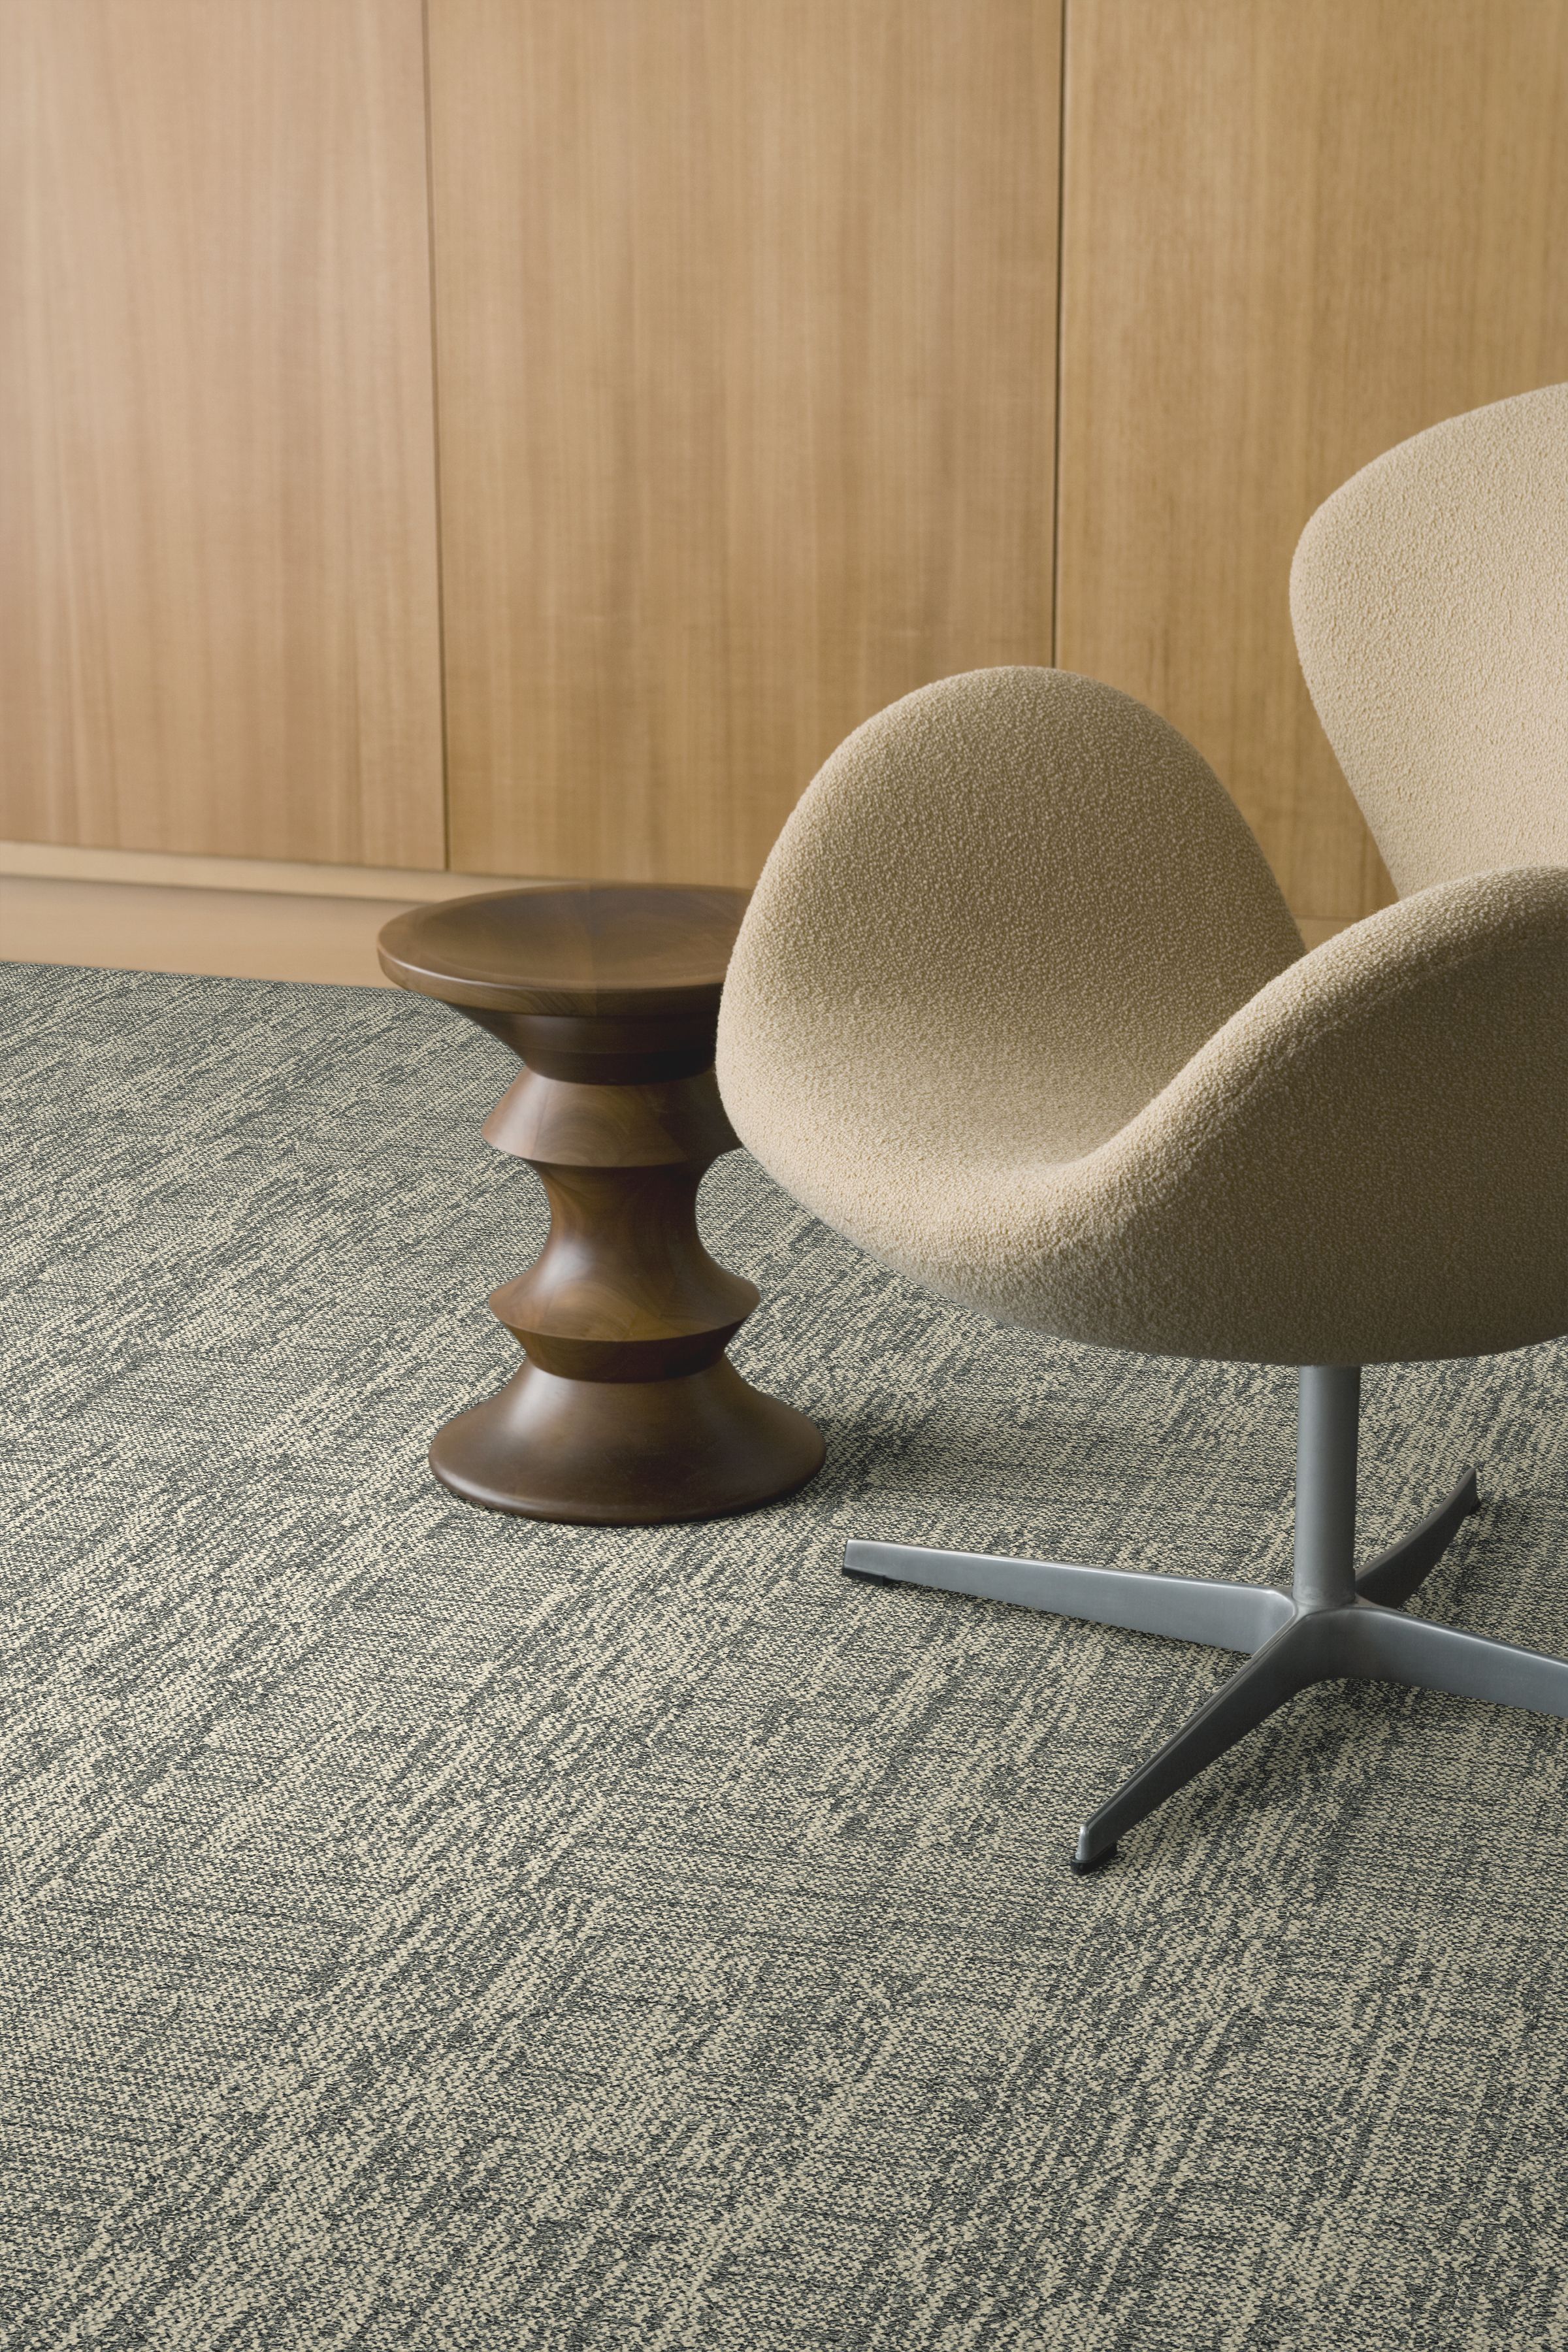 Interface Intermedio plank carpet tile in meeting room with four chairs and table numéro d’image 6